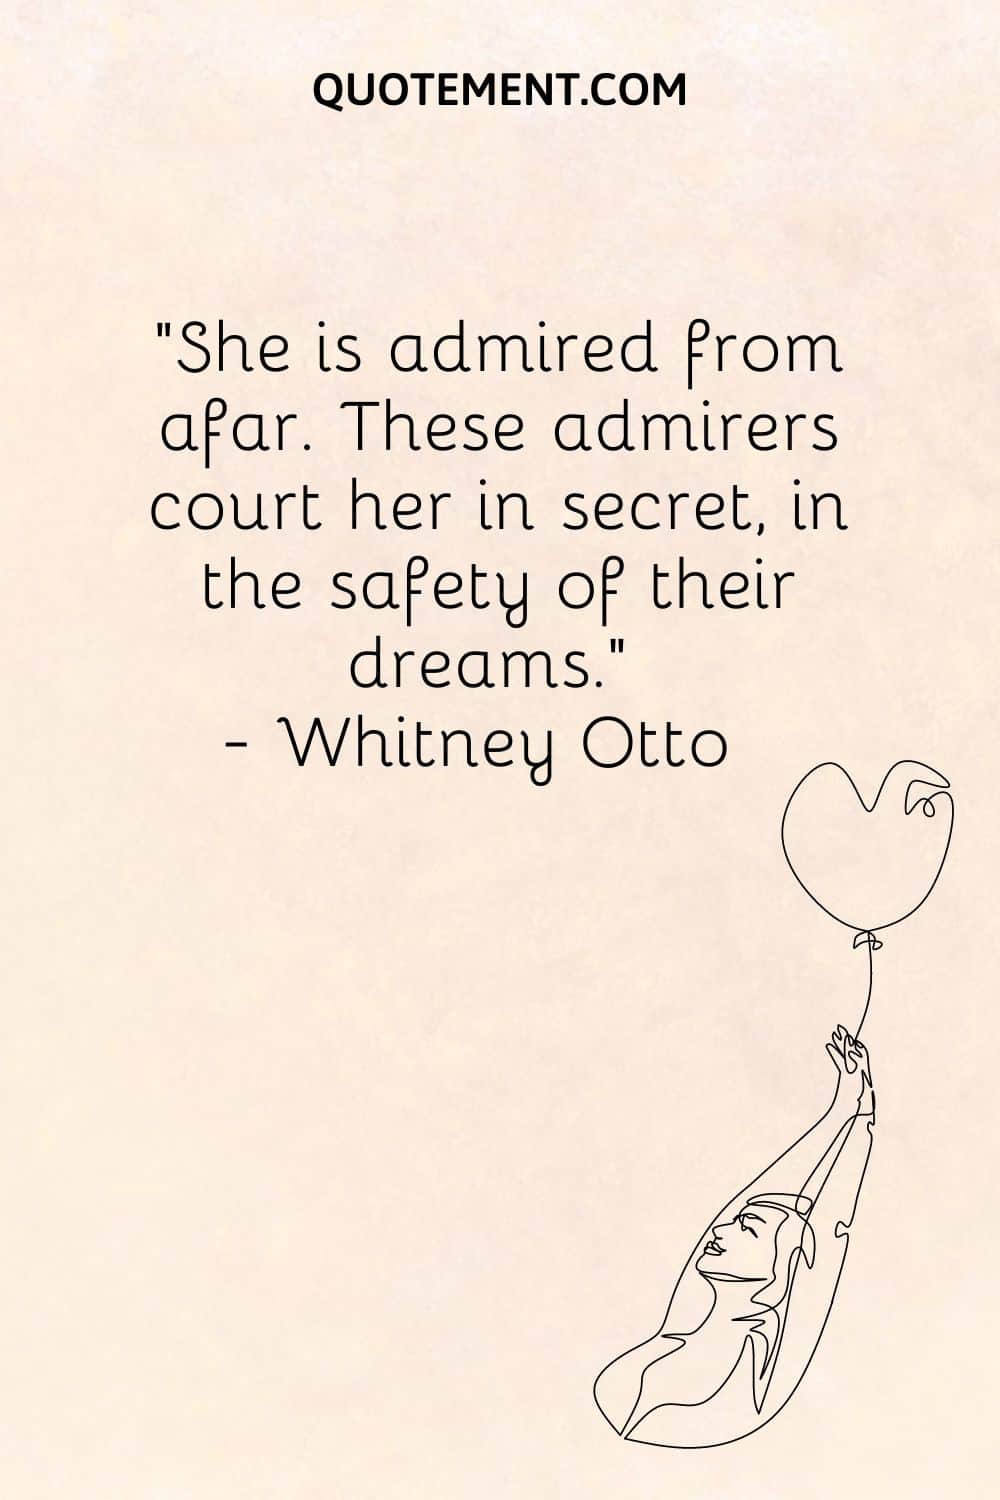 “She is admired from afar. These admirers court her in secret, in the safety of their dreams.